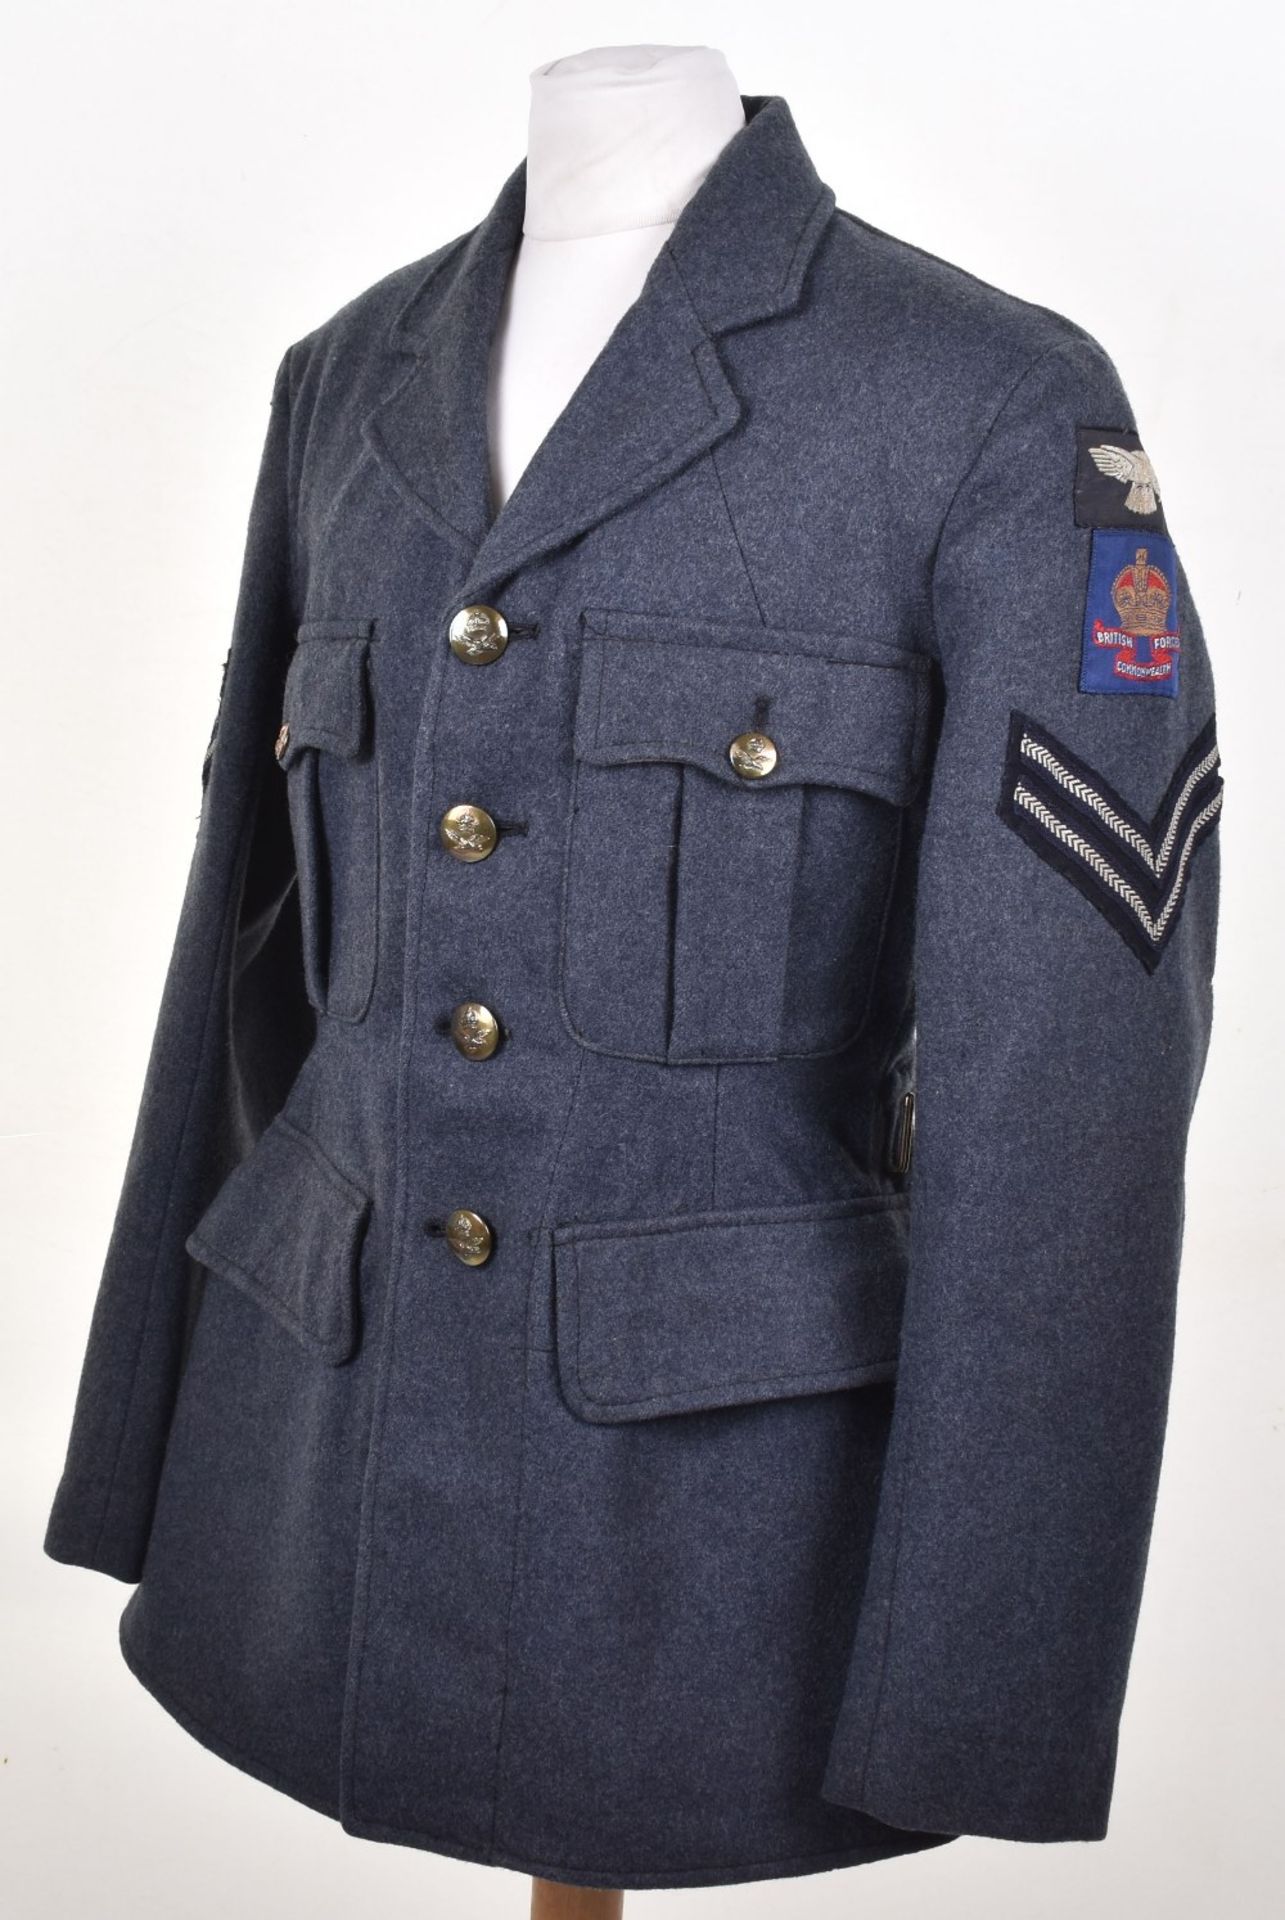 Scarce Royal Air Force Other Ranks Tunic with Insignia for British Commonwealth Occupation Force Jap - Image 4 of 10